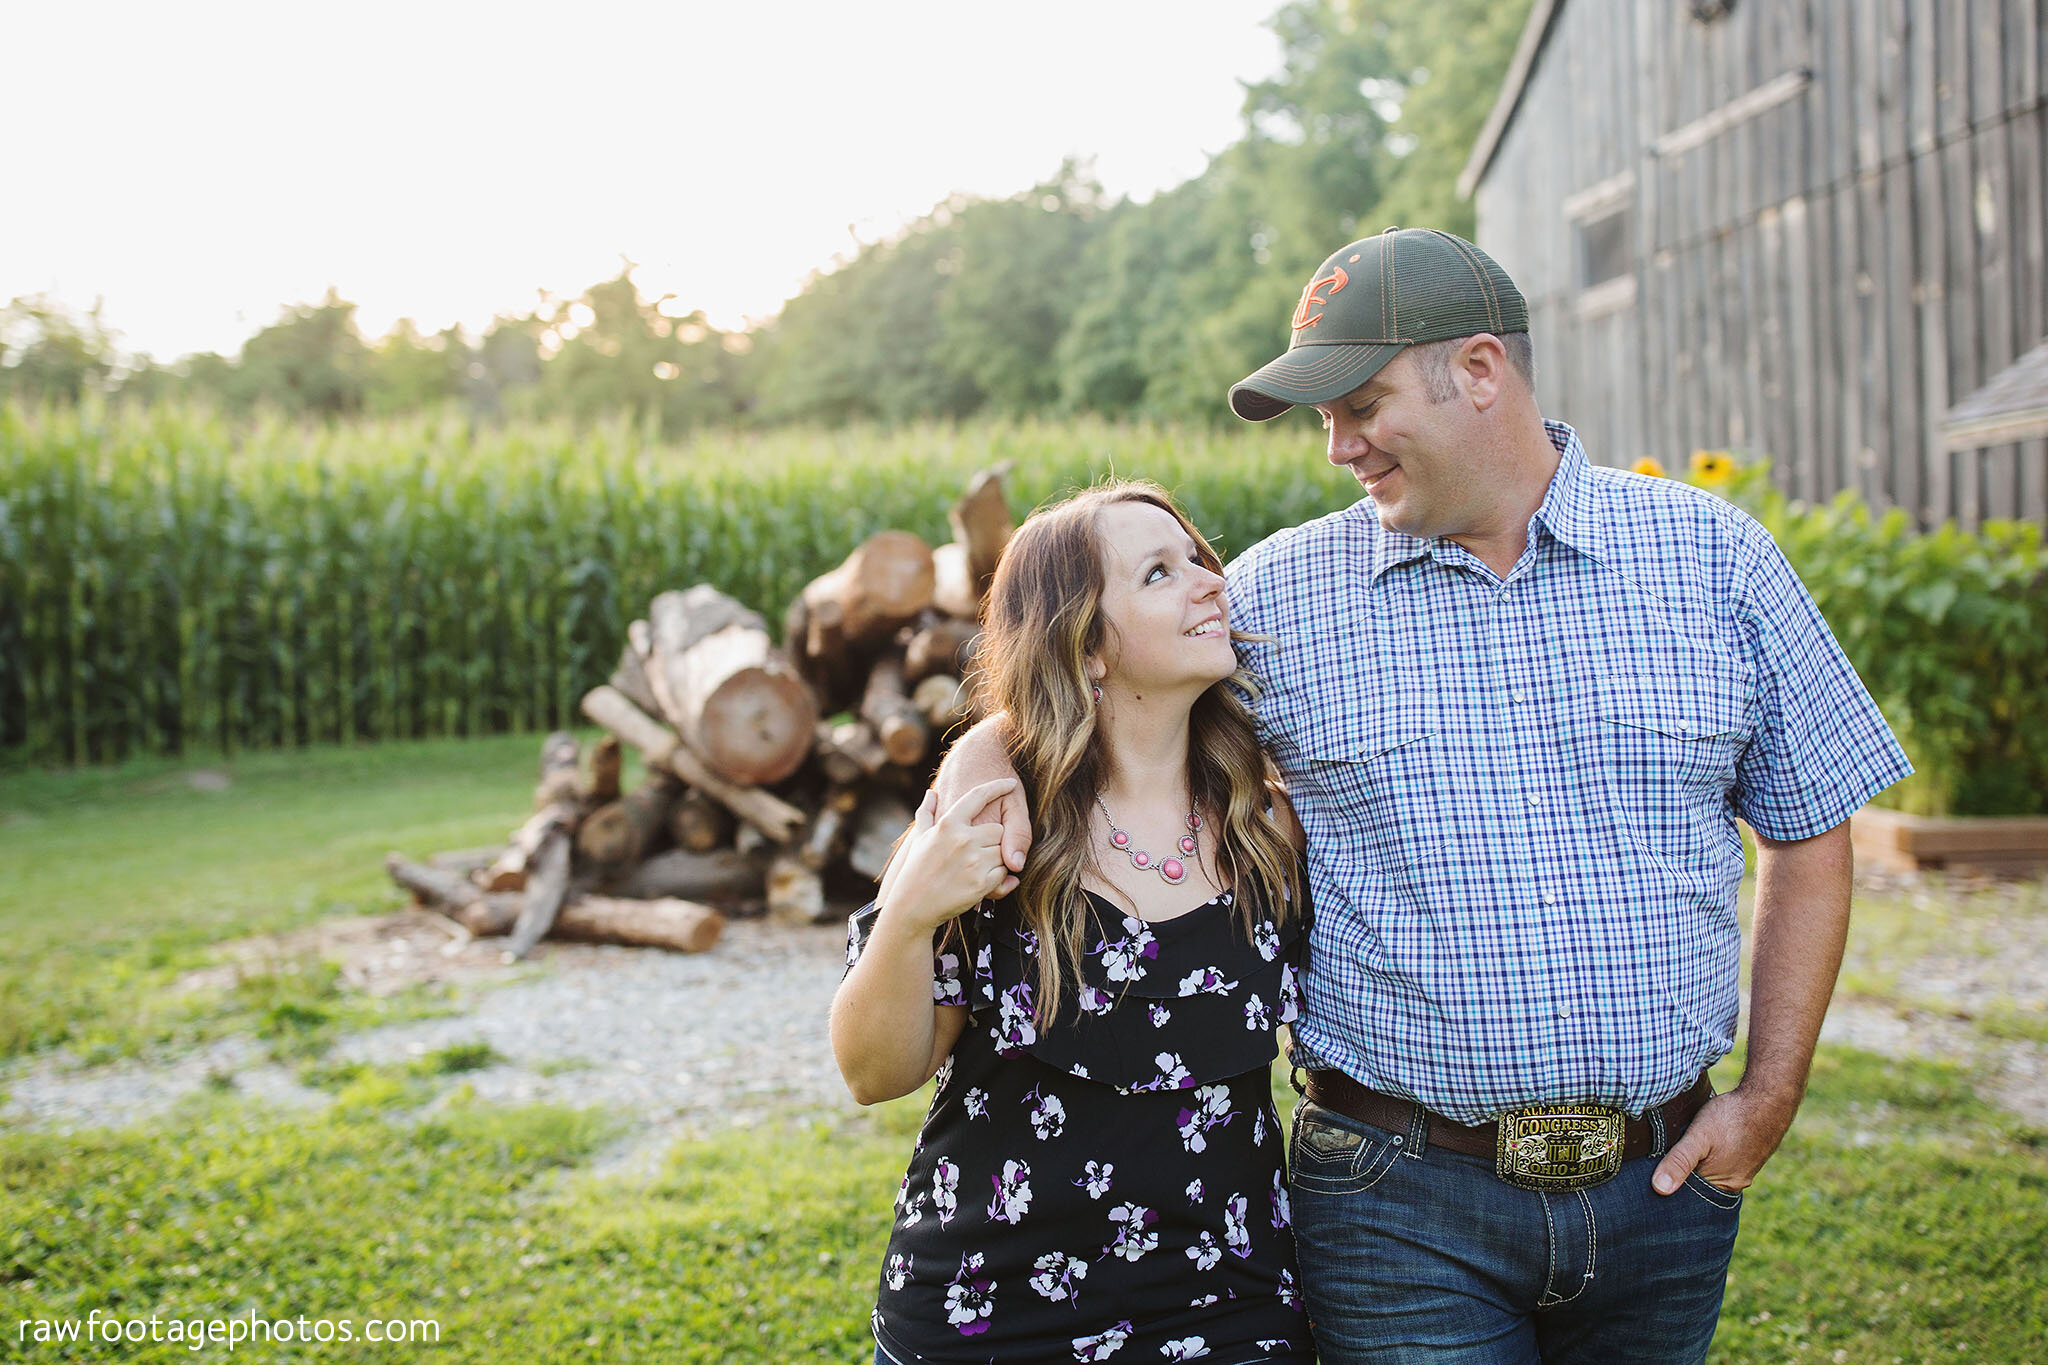 london_ontario_wedding_photographer-engagement_session-farm_engagement-country_e_session-raw_footage_photography-corn_field-010.jpg